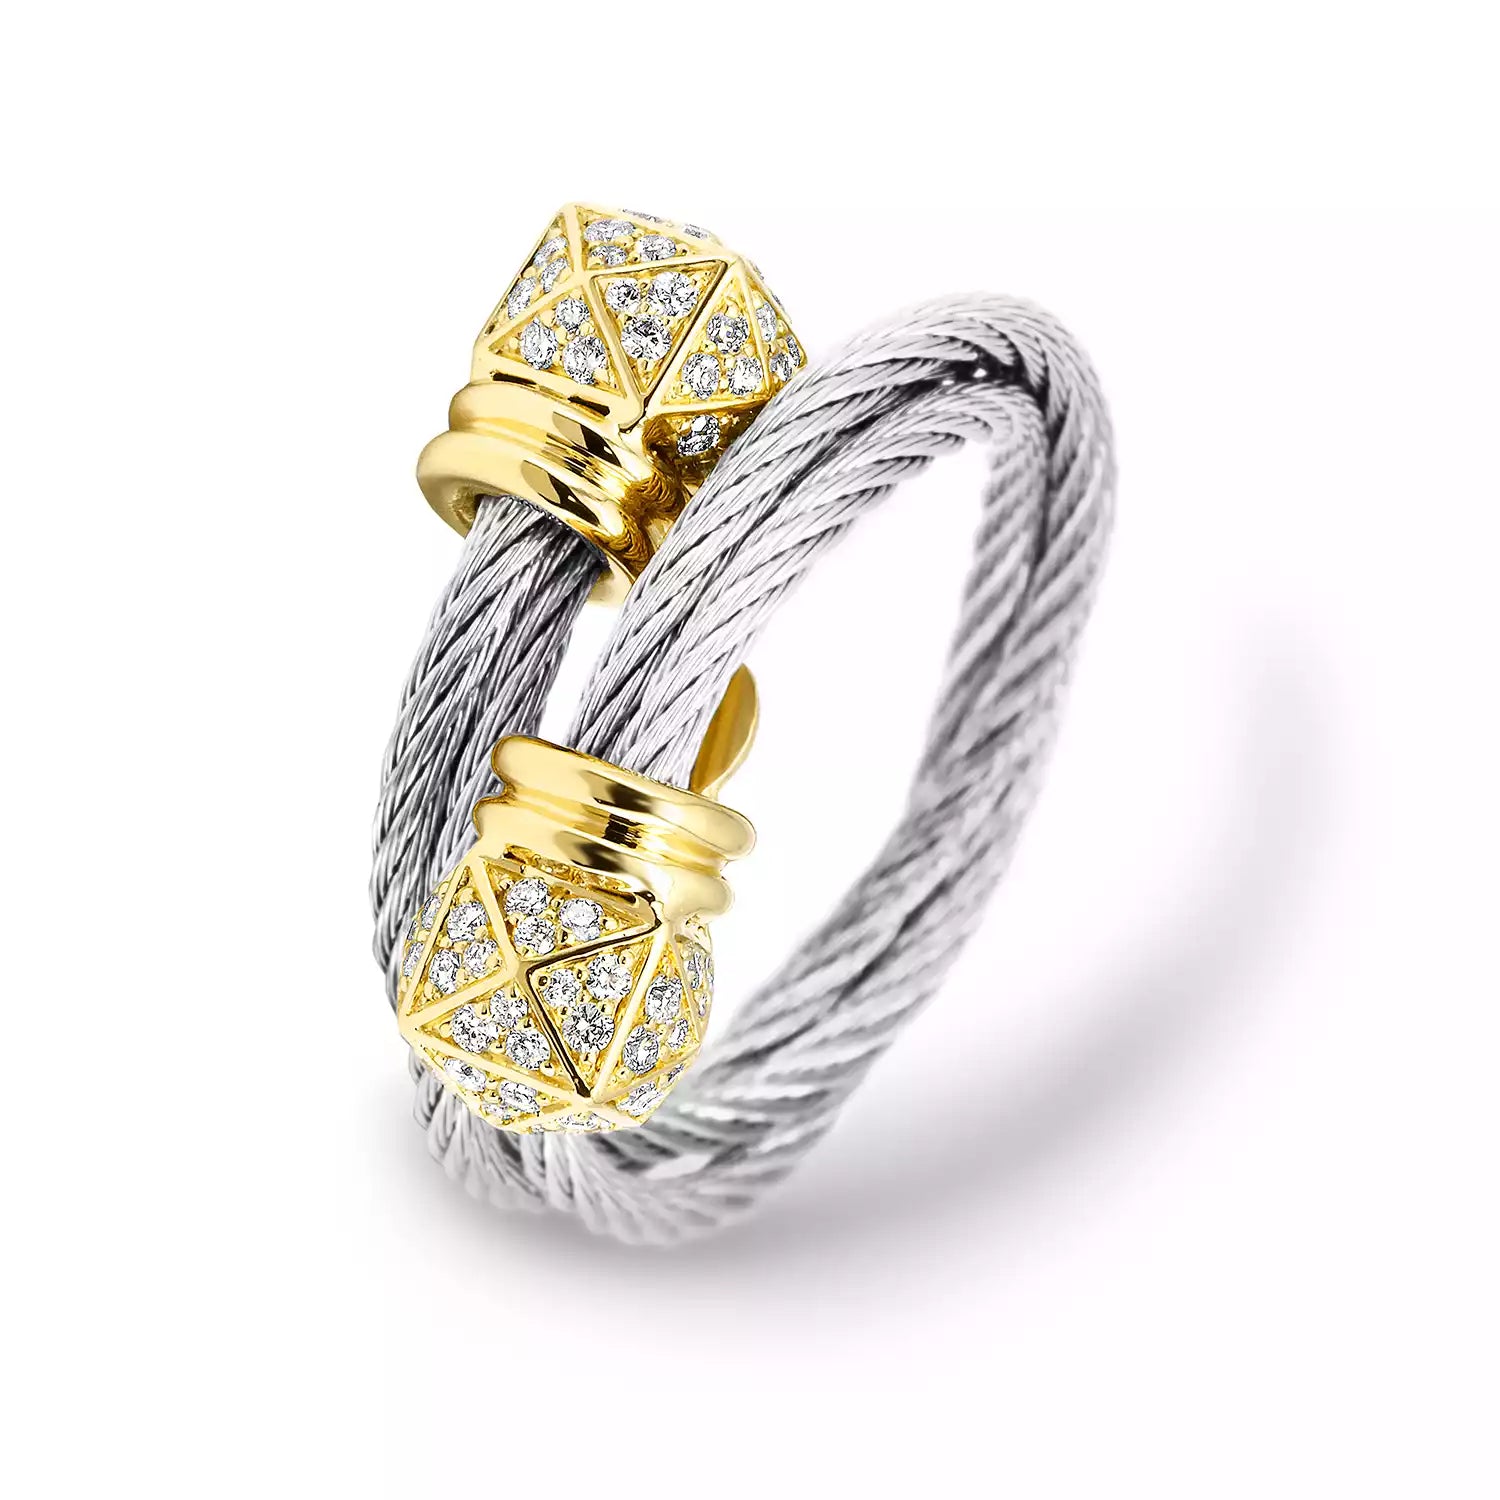 Steel_Gold 18KT with 120 Diamonds 0.57ct